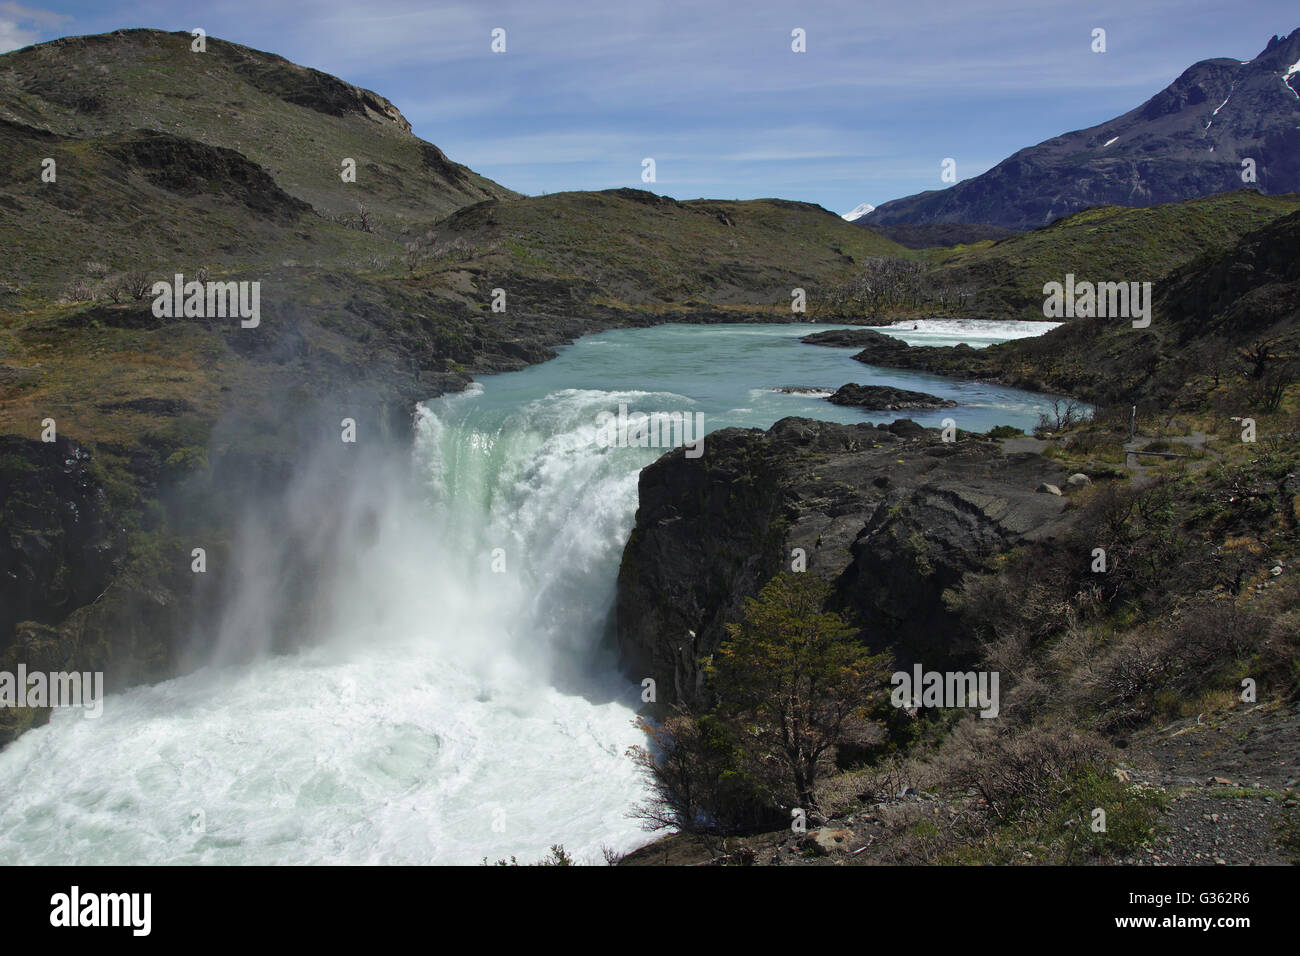 Salto Grande, big waterfall, Torres del Paine National Park, Chile Stock Photo